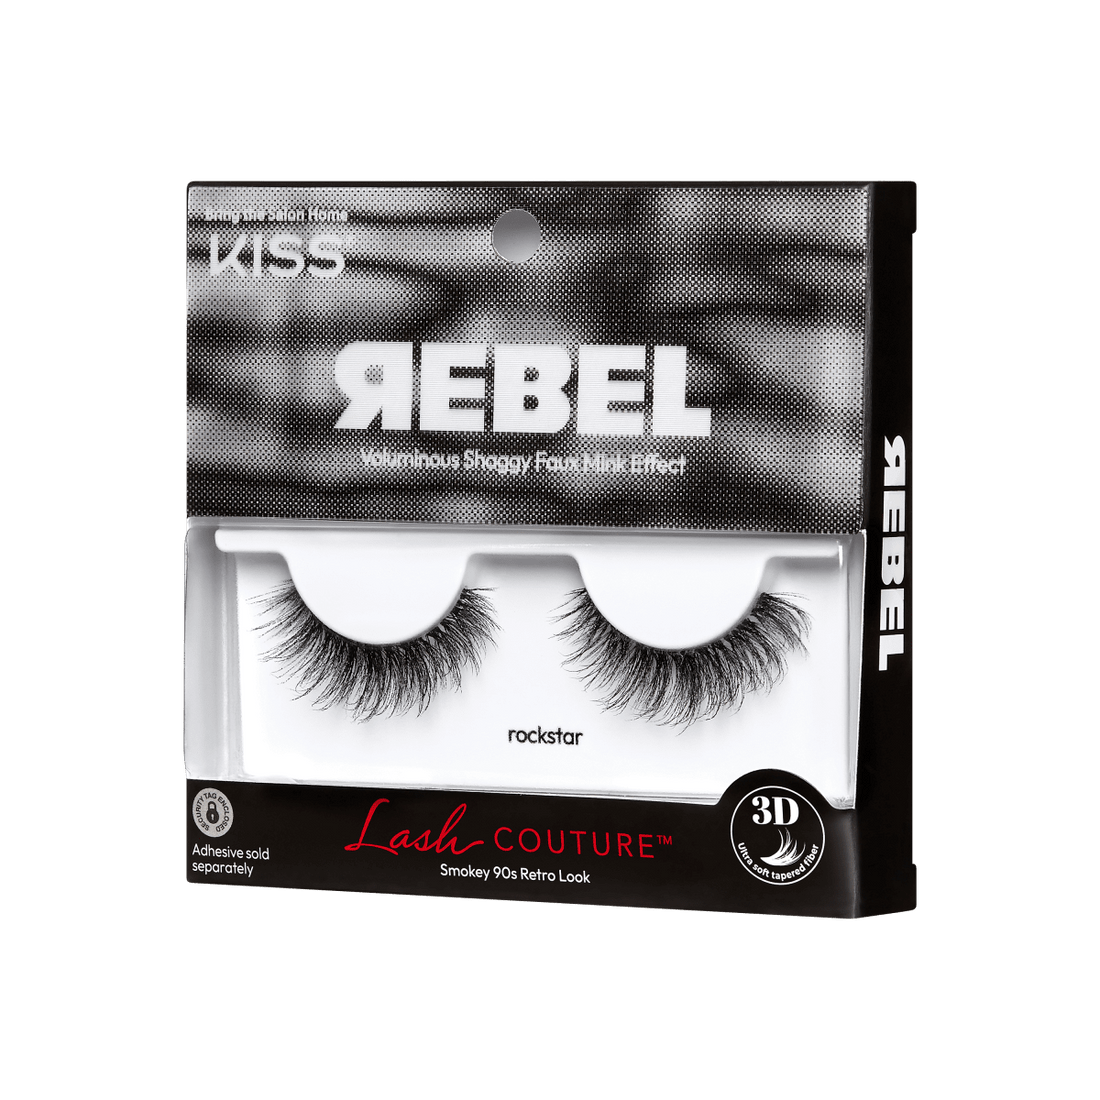 Packaging for false lashes from the Lash Couture &quot;Rebel&quot; collection from KISS. False lashes in &quot;Rockstar&quot; style no glue included